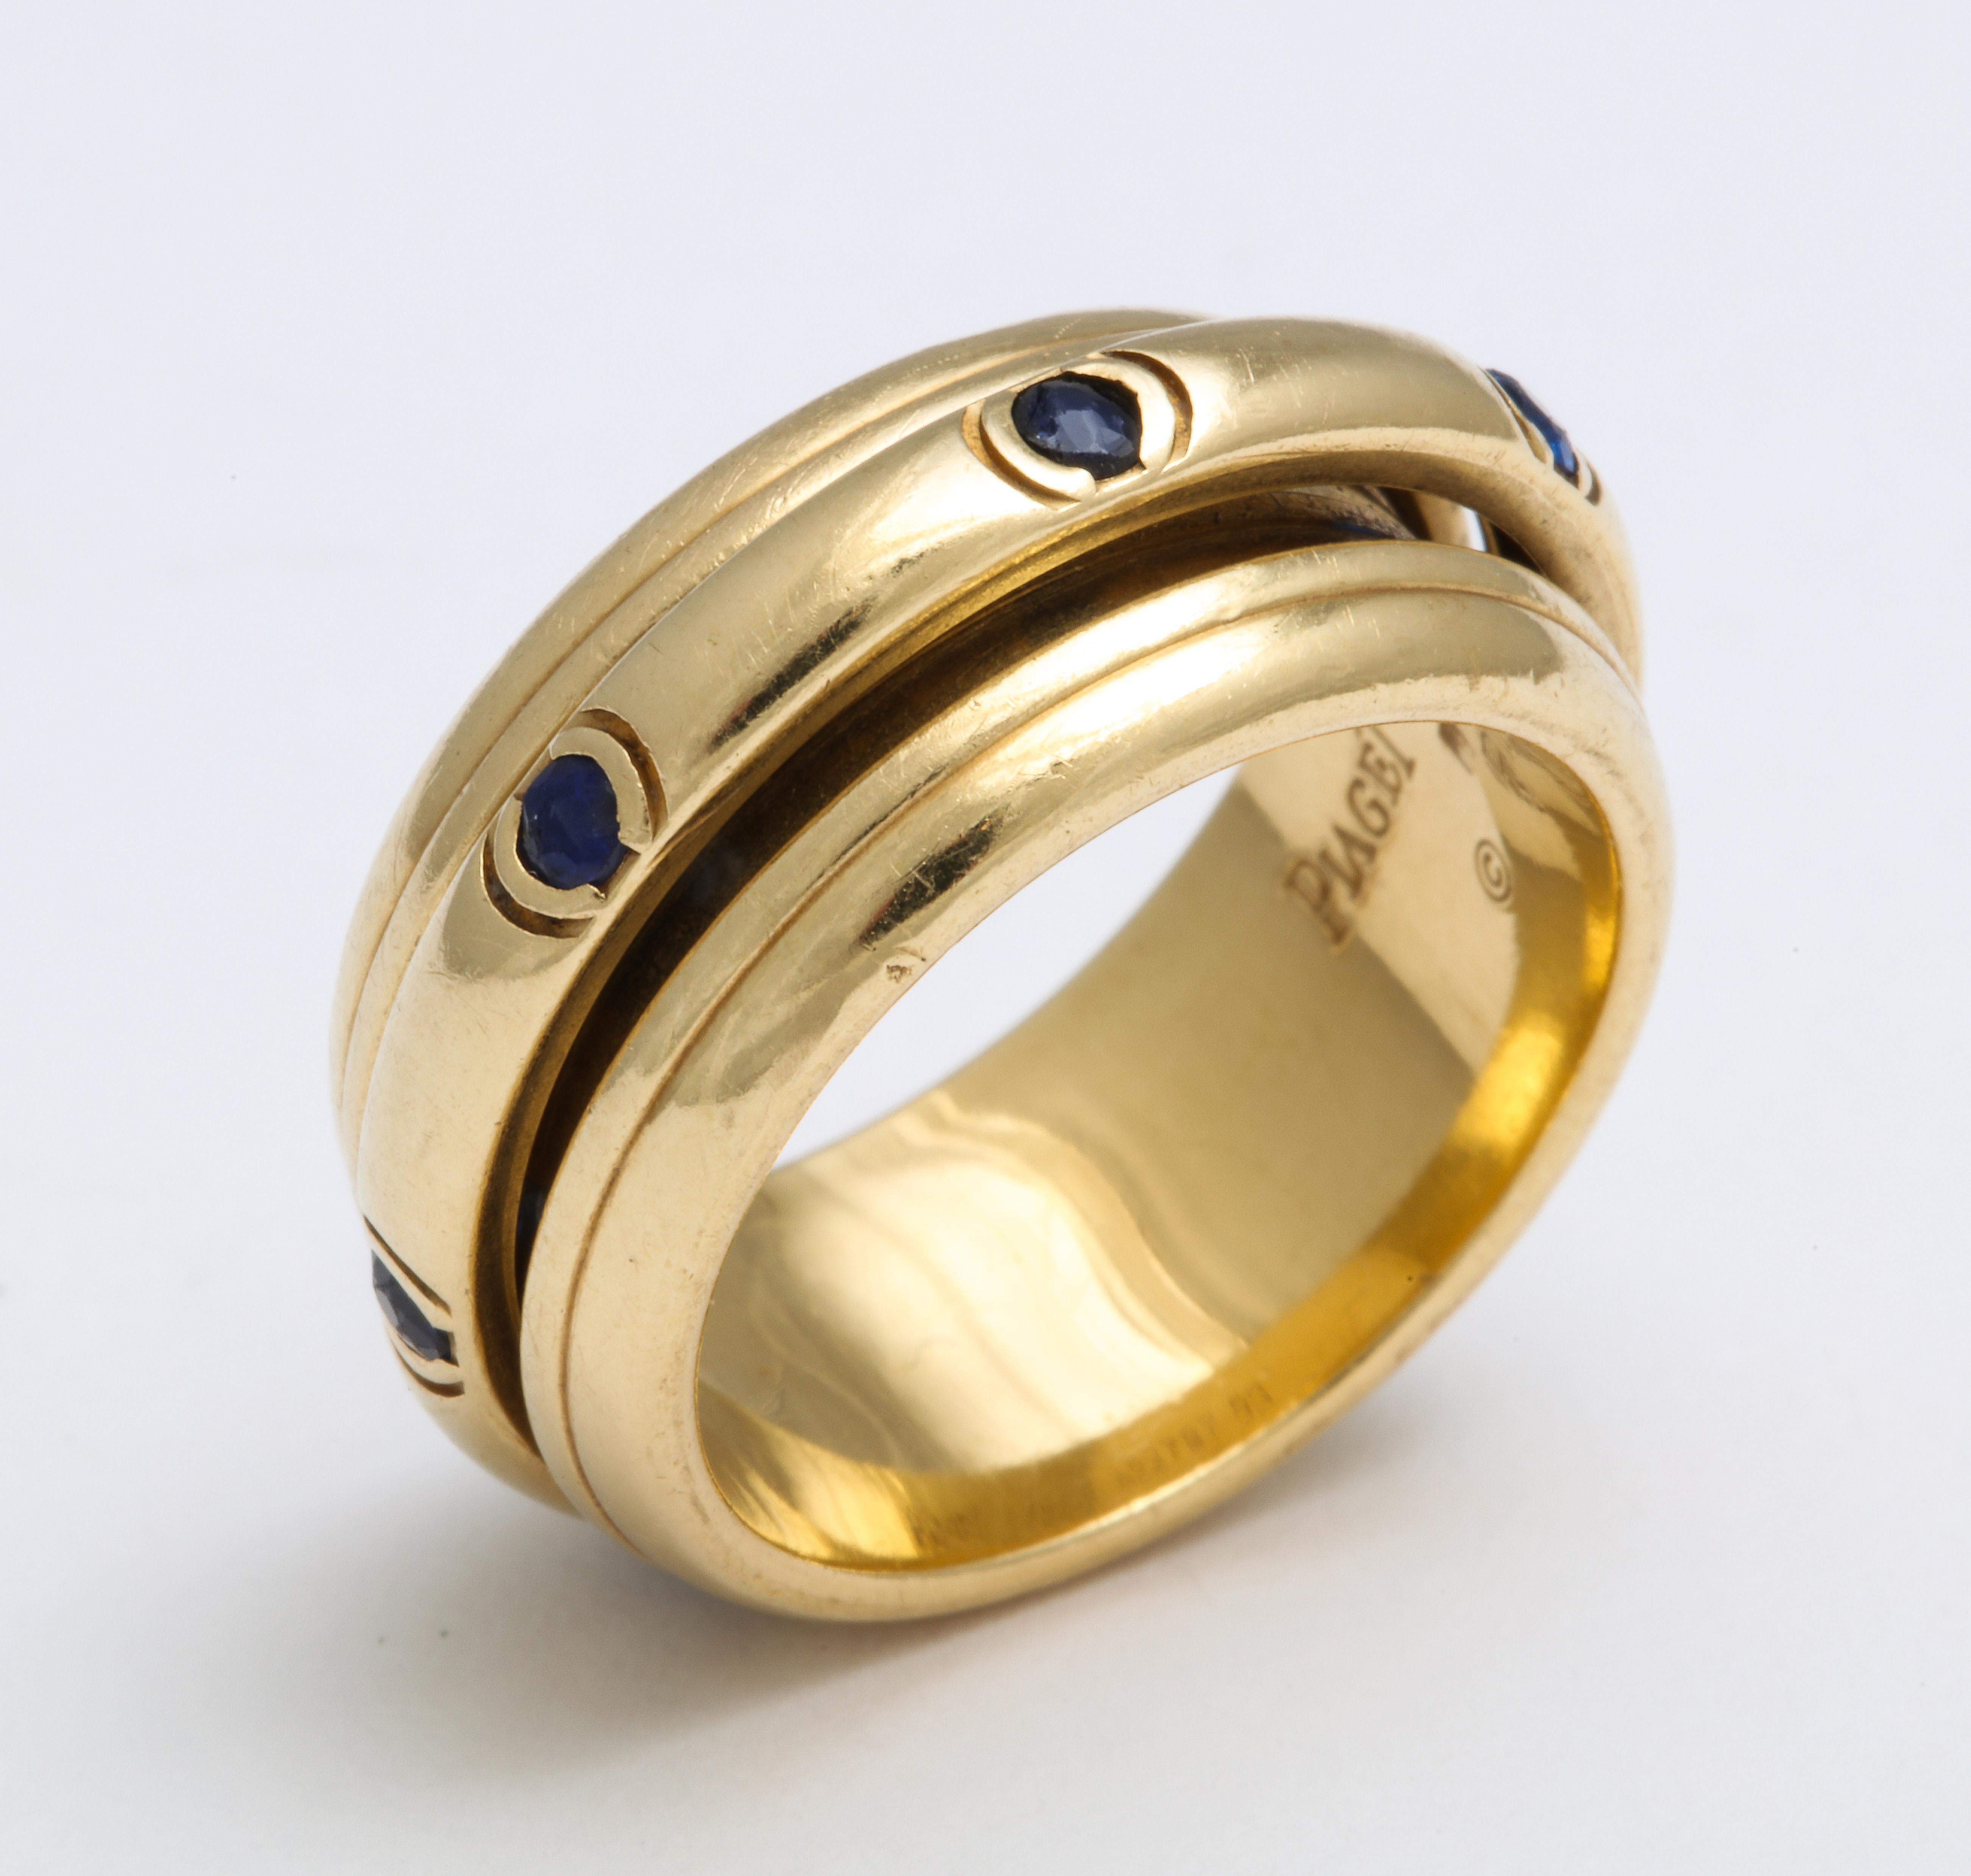 An amusing, calming ring of 18 Kt gold with sapphires in the center band. The center rotates as you spin it giving it the name of a fidget ring. Everybody fidgets sometimes. Here you have a ring to make fidgeting easy and more fun than shaking your